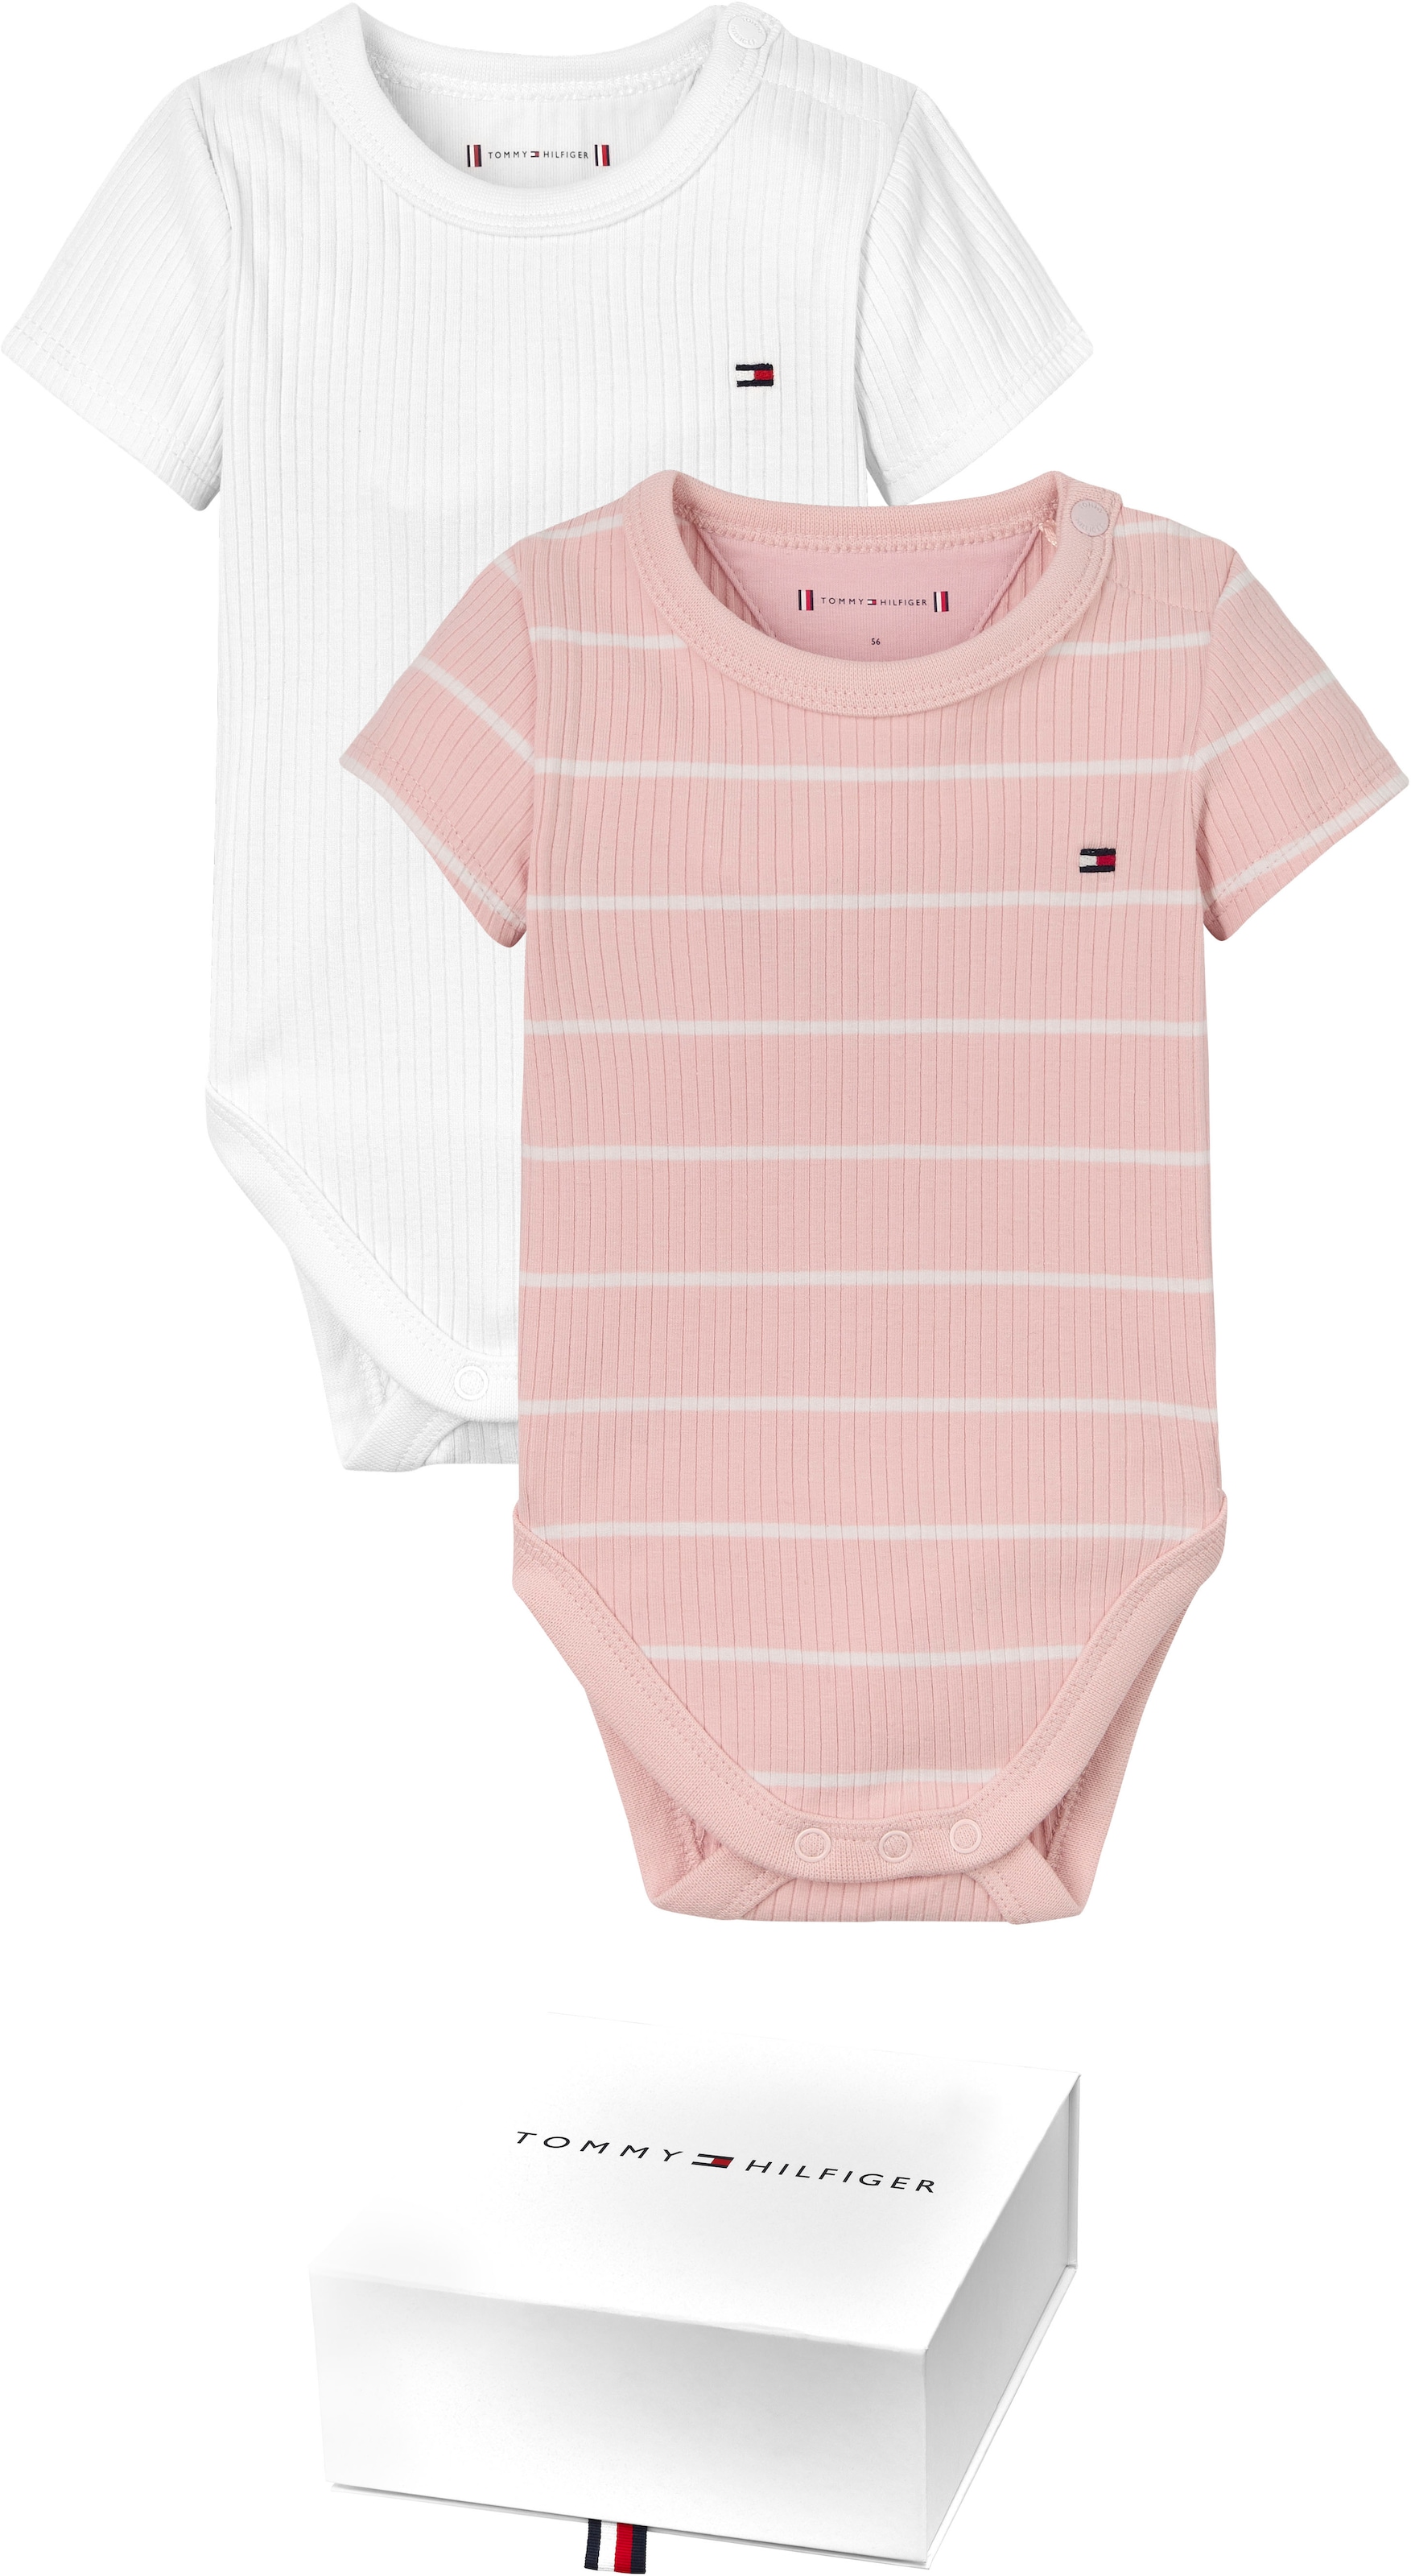 Tommy Hilfiger Kurzarmbody »BABY RIB BODY 2 PACK GIFTBOX«, (Packung, 2 tlg., 2er-Pack), Baby bis 2 Jahre